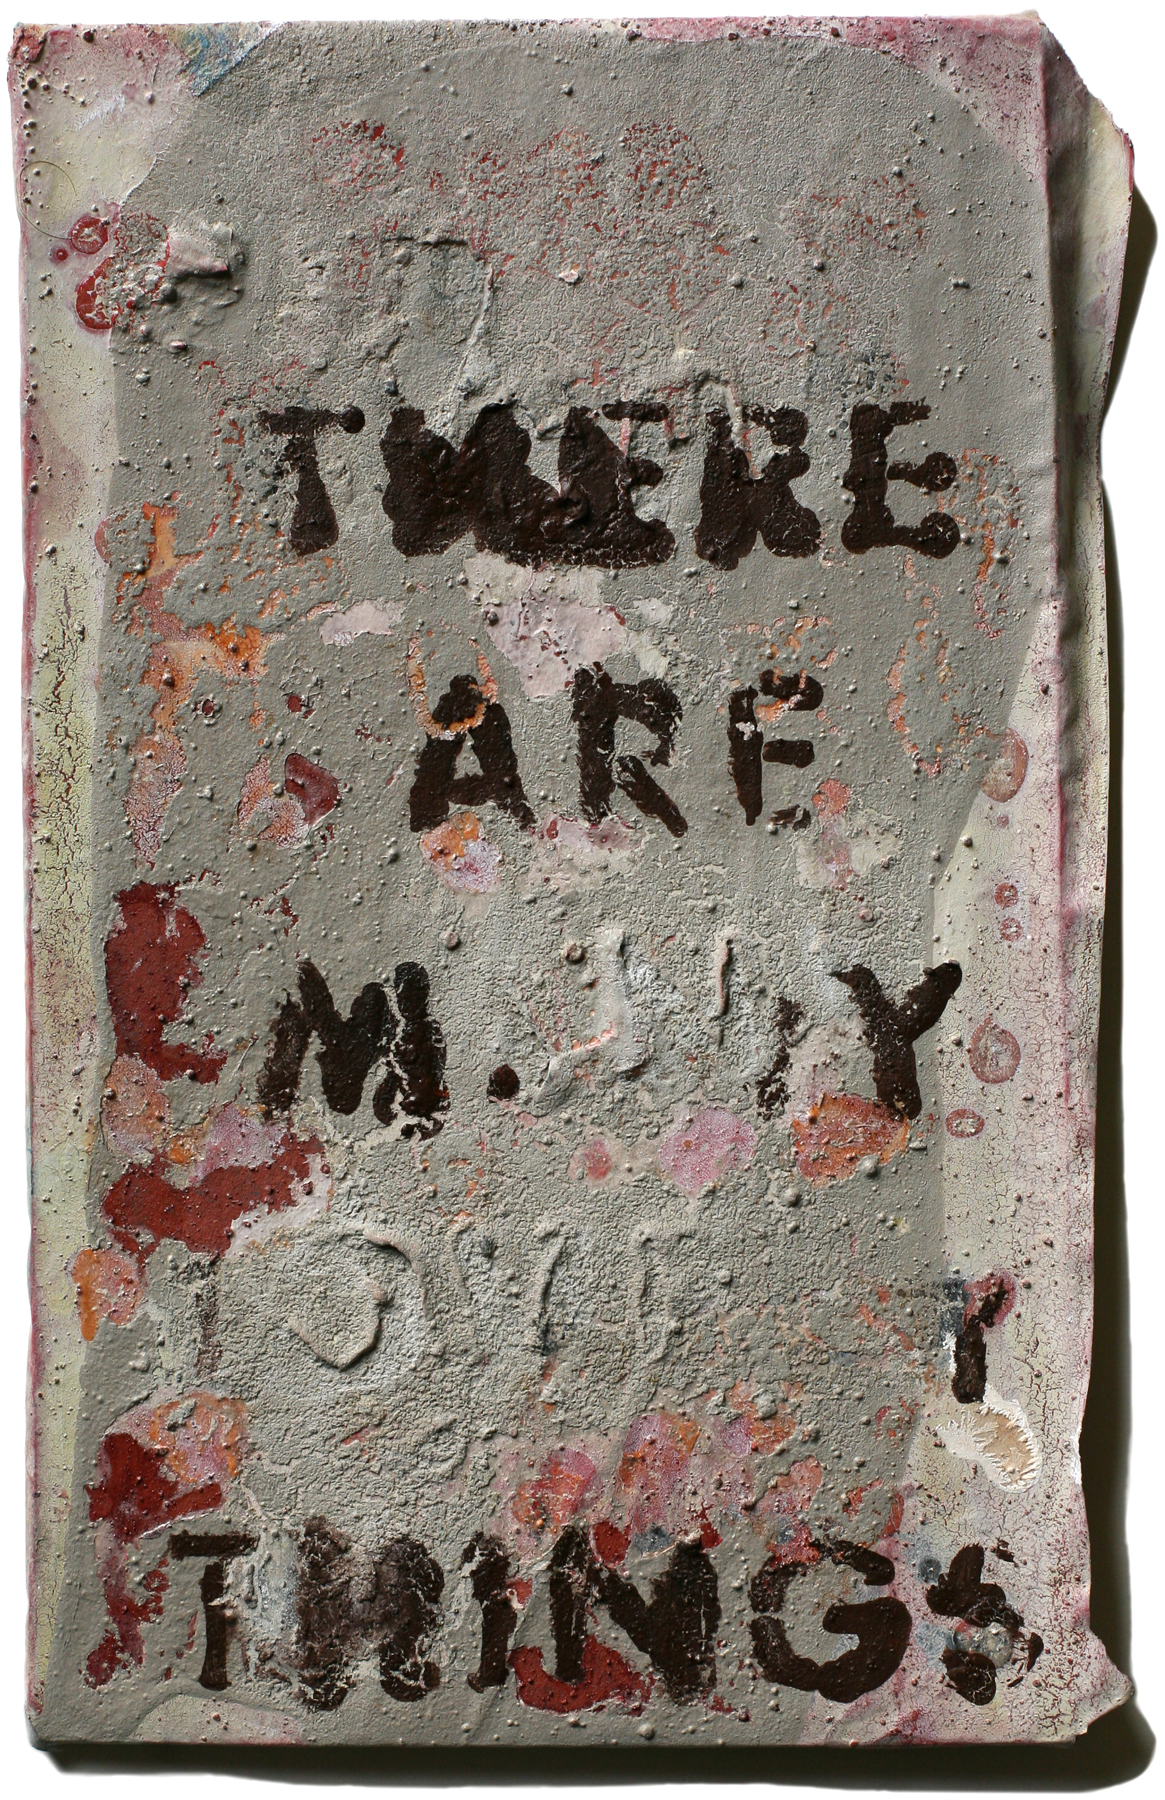 Lovely Things 43, 10" x 6", 2008-2010